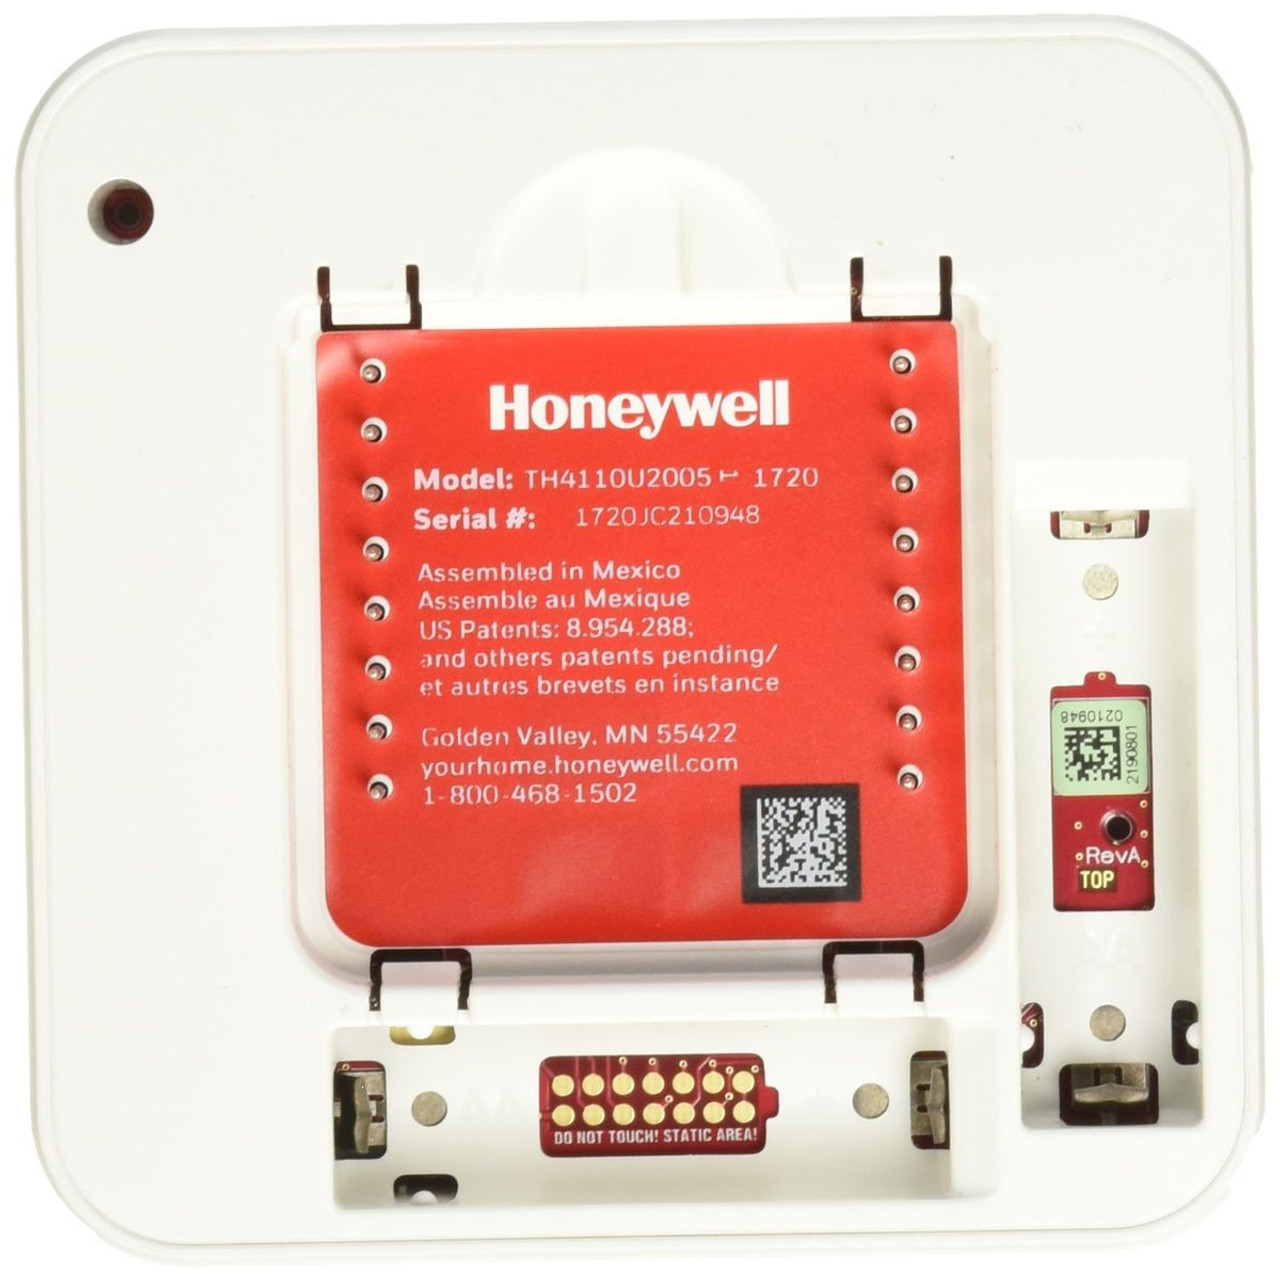 Honeywell T4 Pro Programmable Thermostat product image